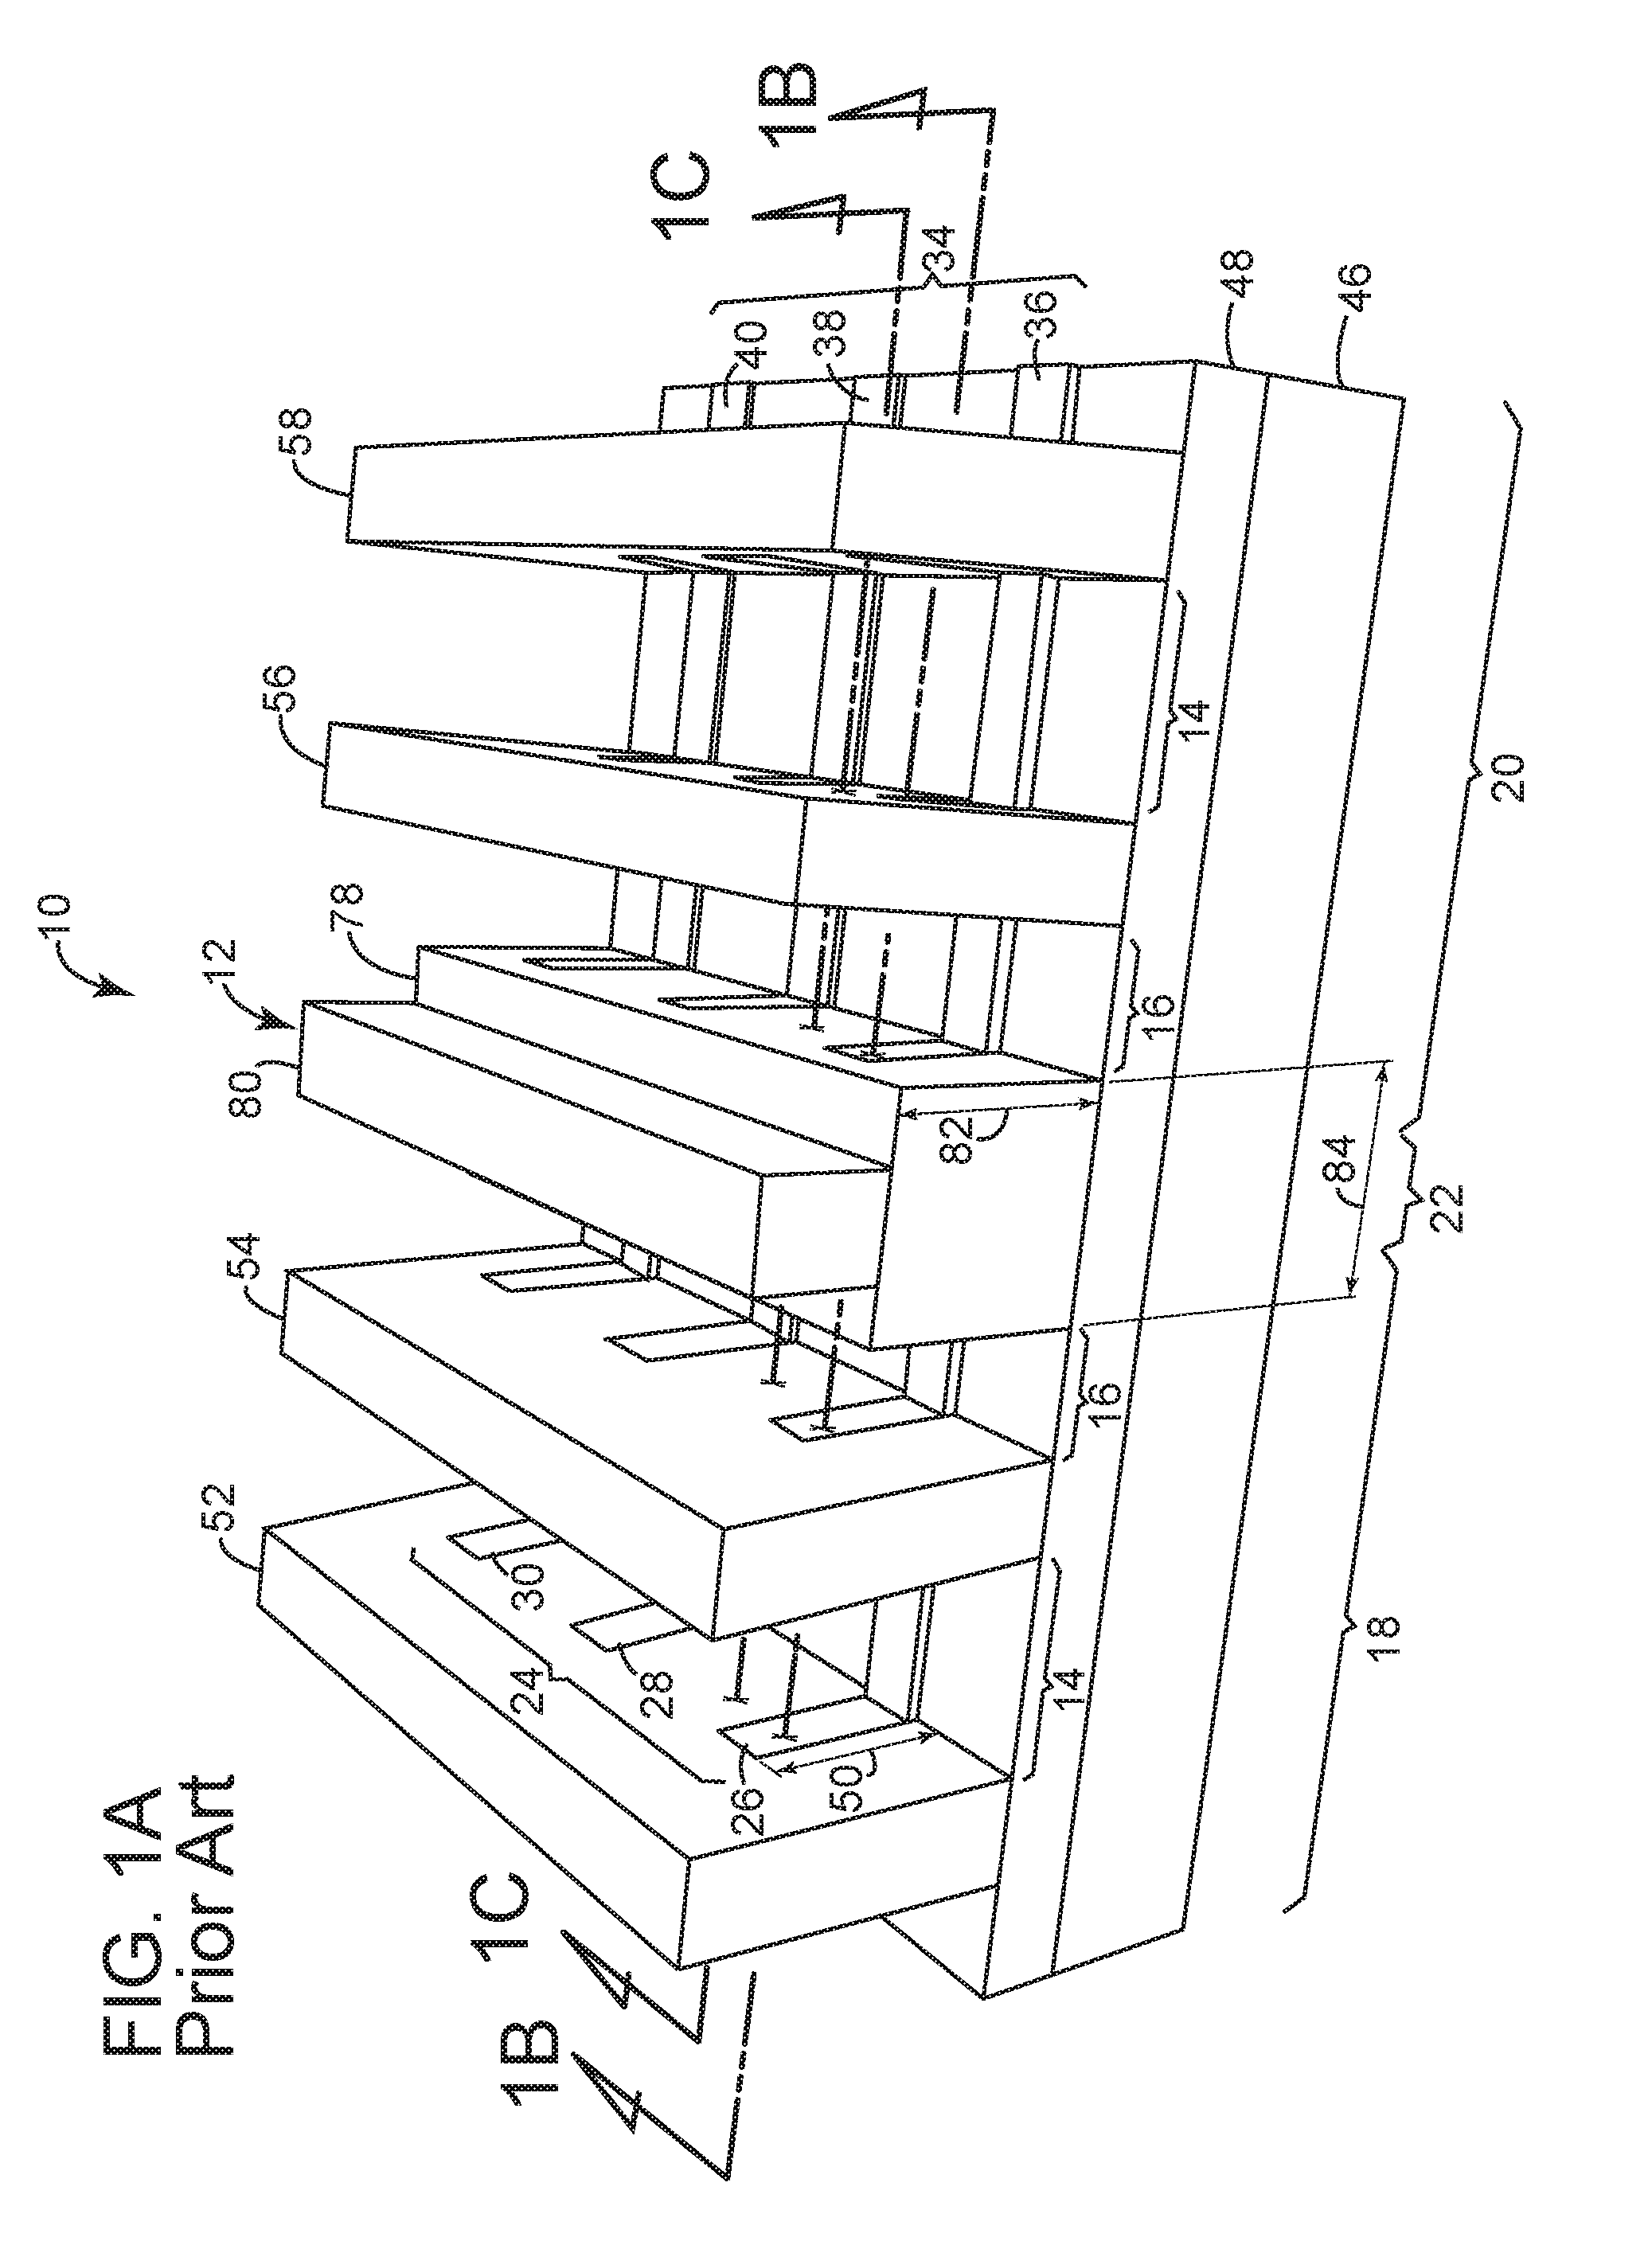 Single diffusion break structure and cuts later method of making